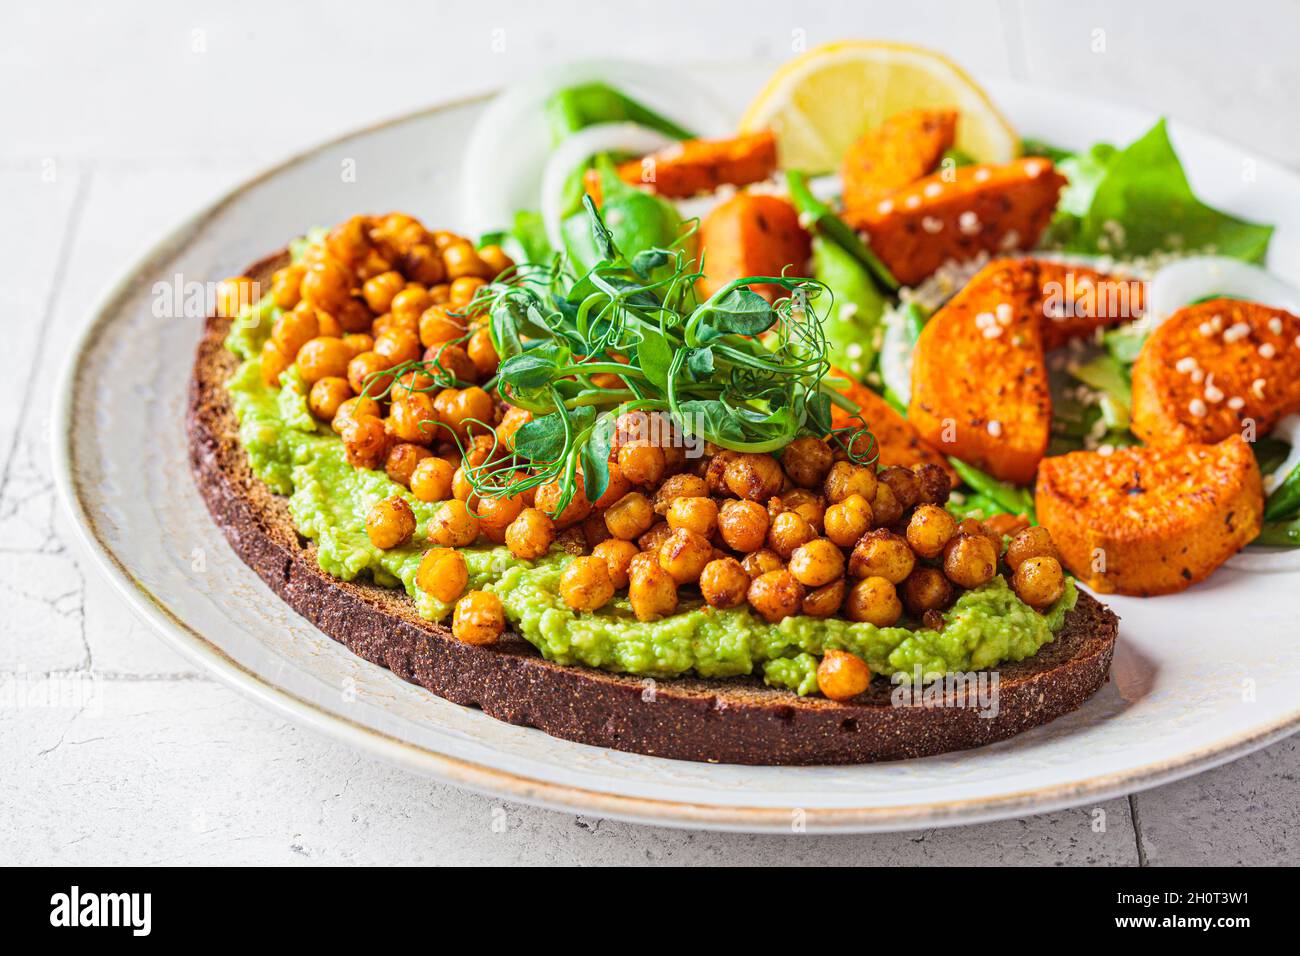 Toast with guacamole and crispy chickpeas, close-up. Vegan food concept. Stock Photo